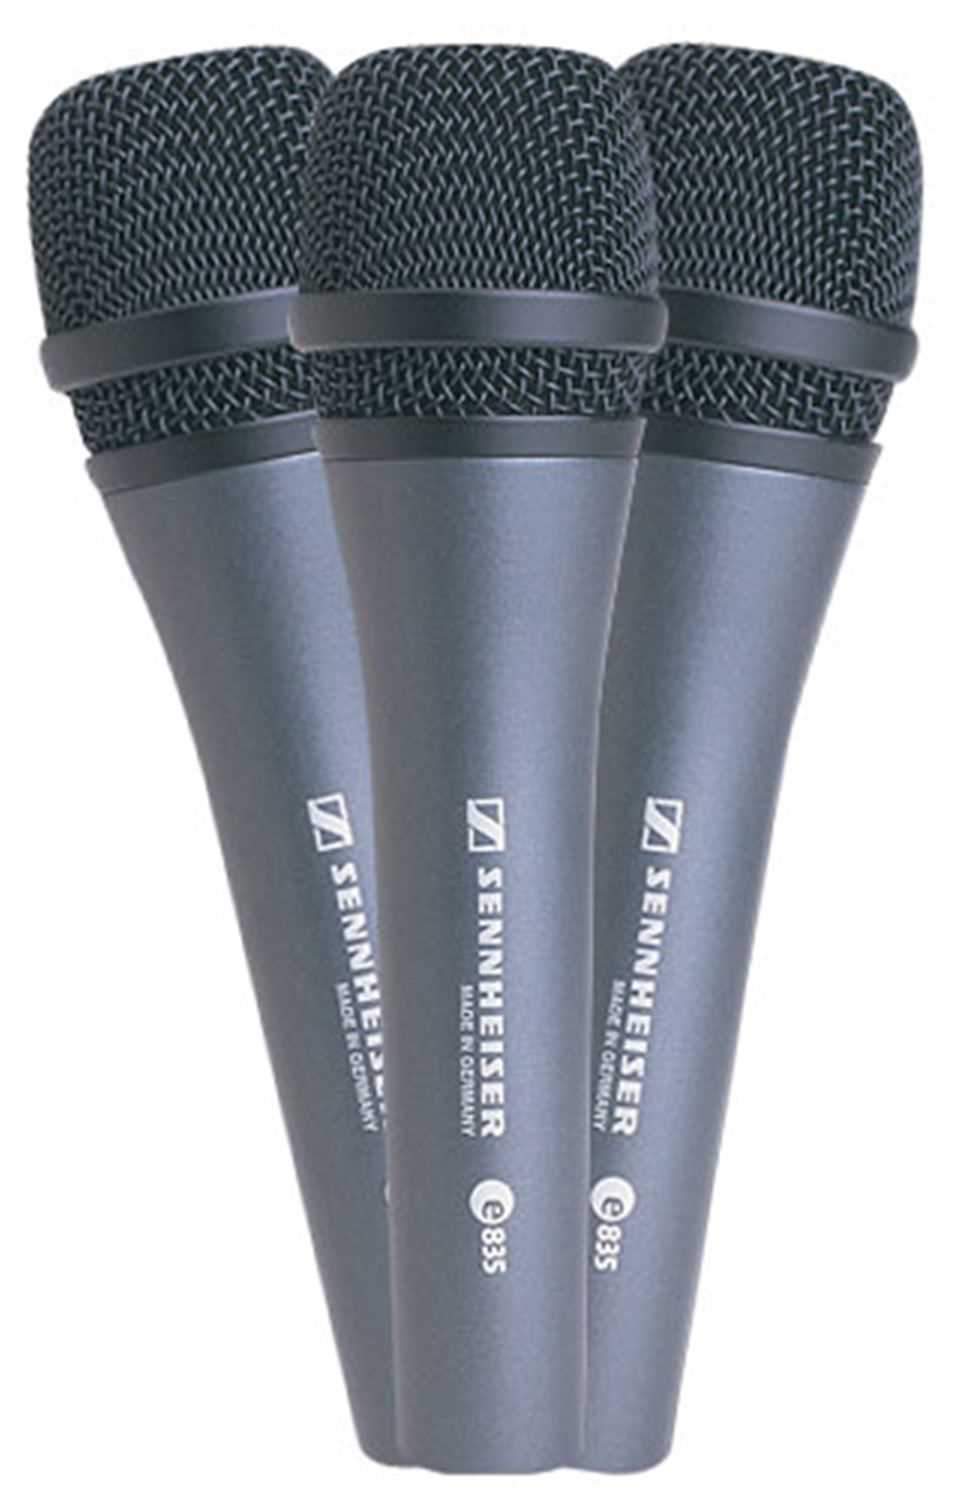 Sennheiser E835 Dynamic Microphone 3 Pack with Clips - ProSound and Stage Lighting